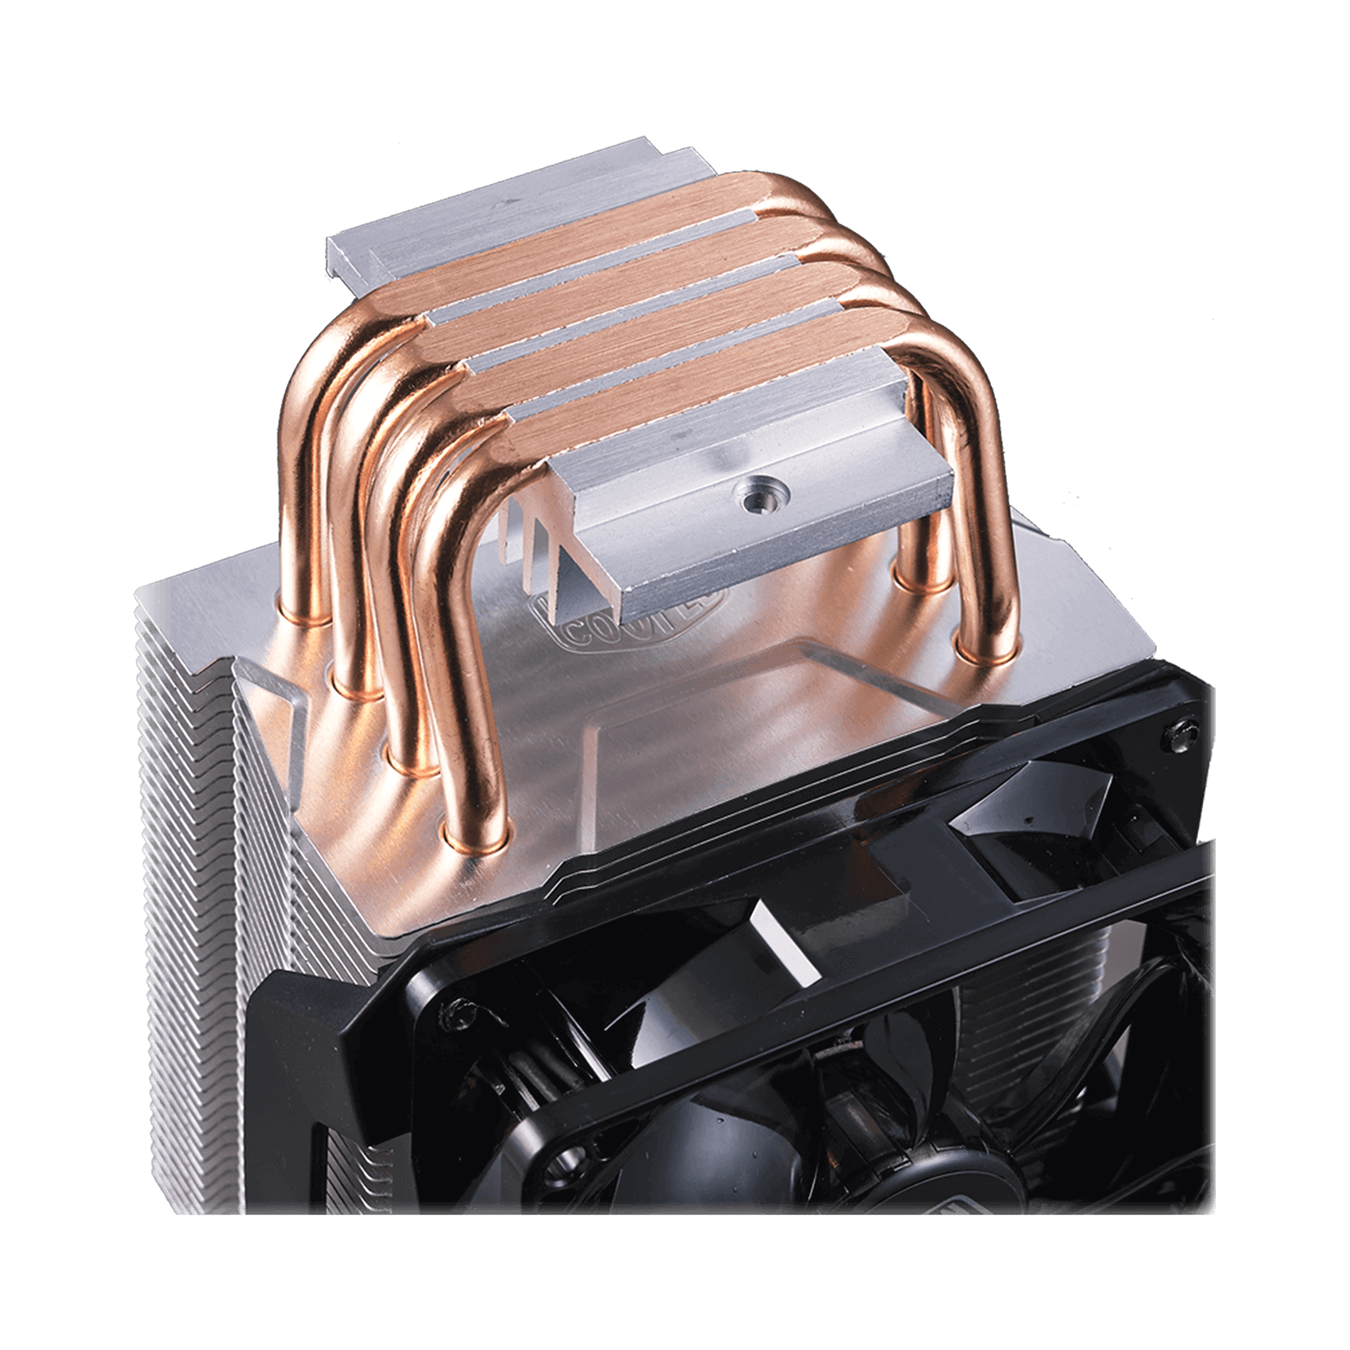 4 heat pipes with Direct Contact Technology effectively provide excellent heat dissipation.